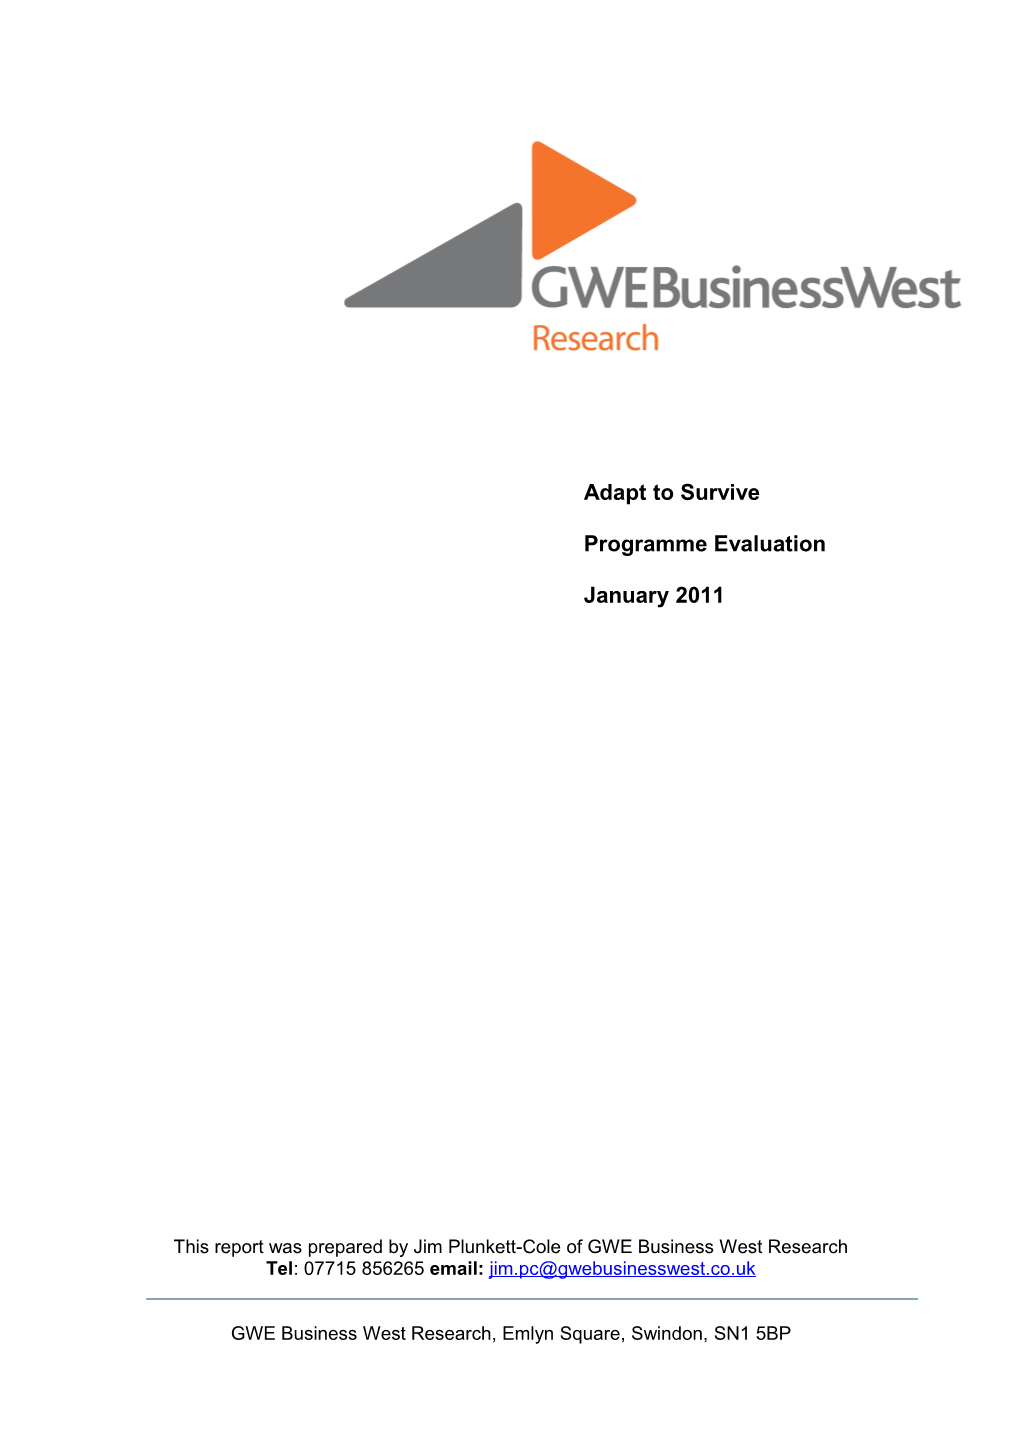 This Report Was Prepared by Jim Plunkett-Cole of GWE Business West Research